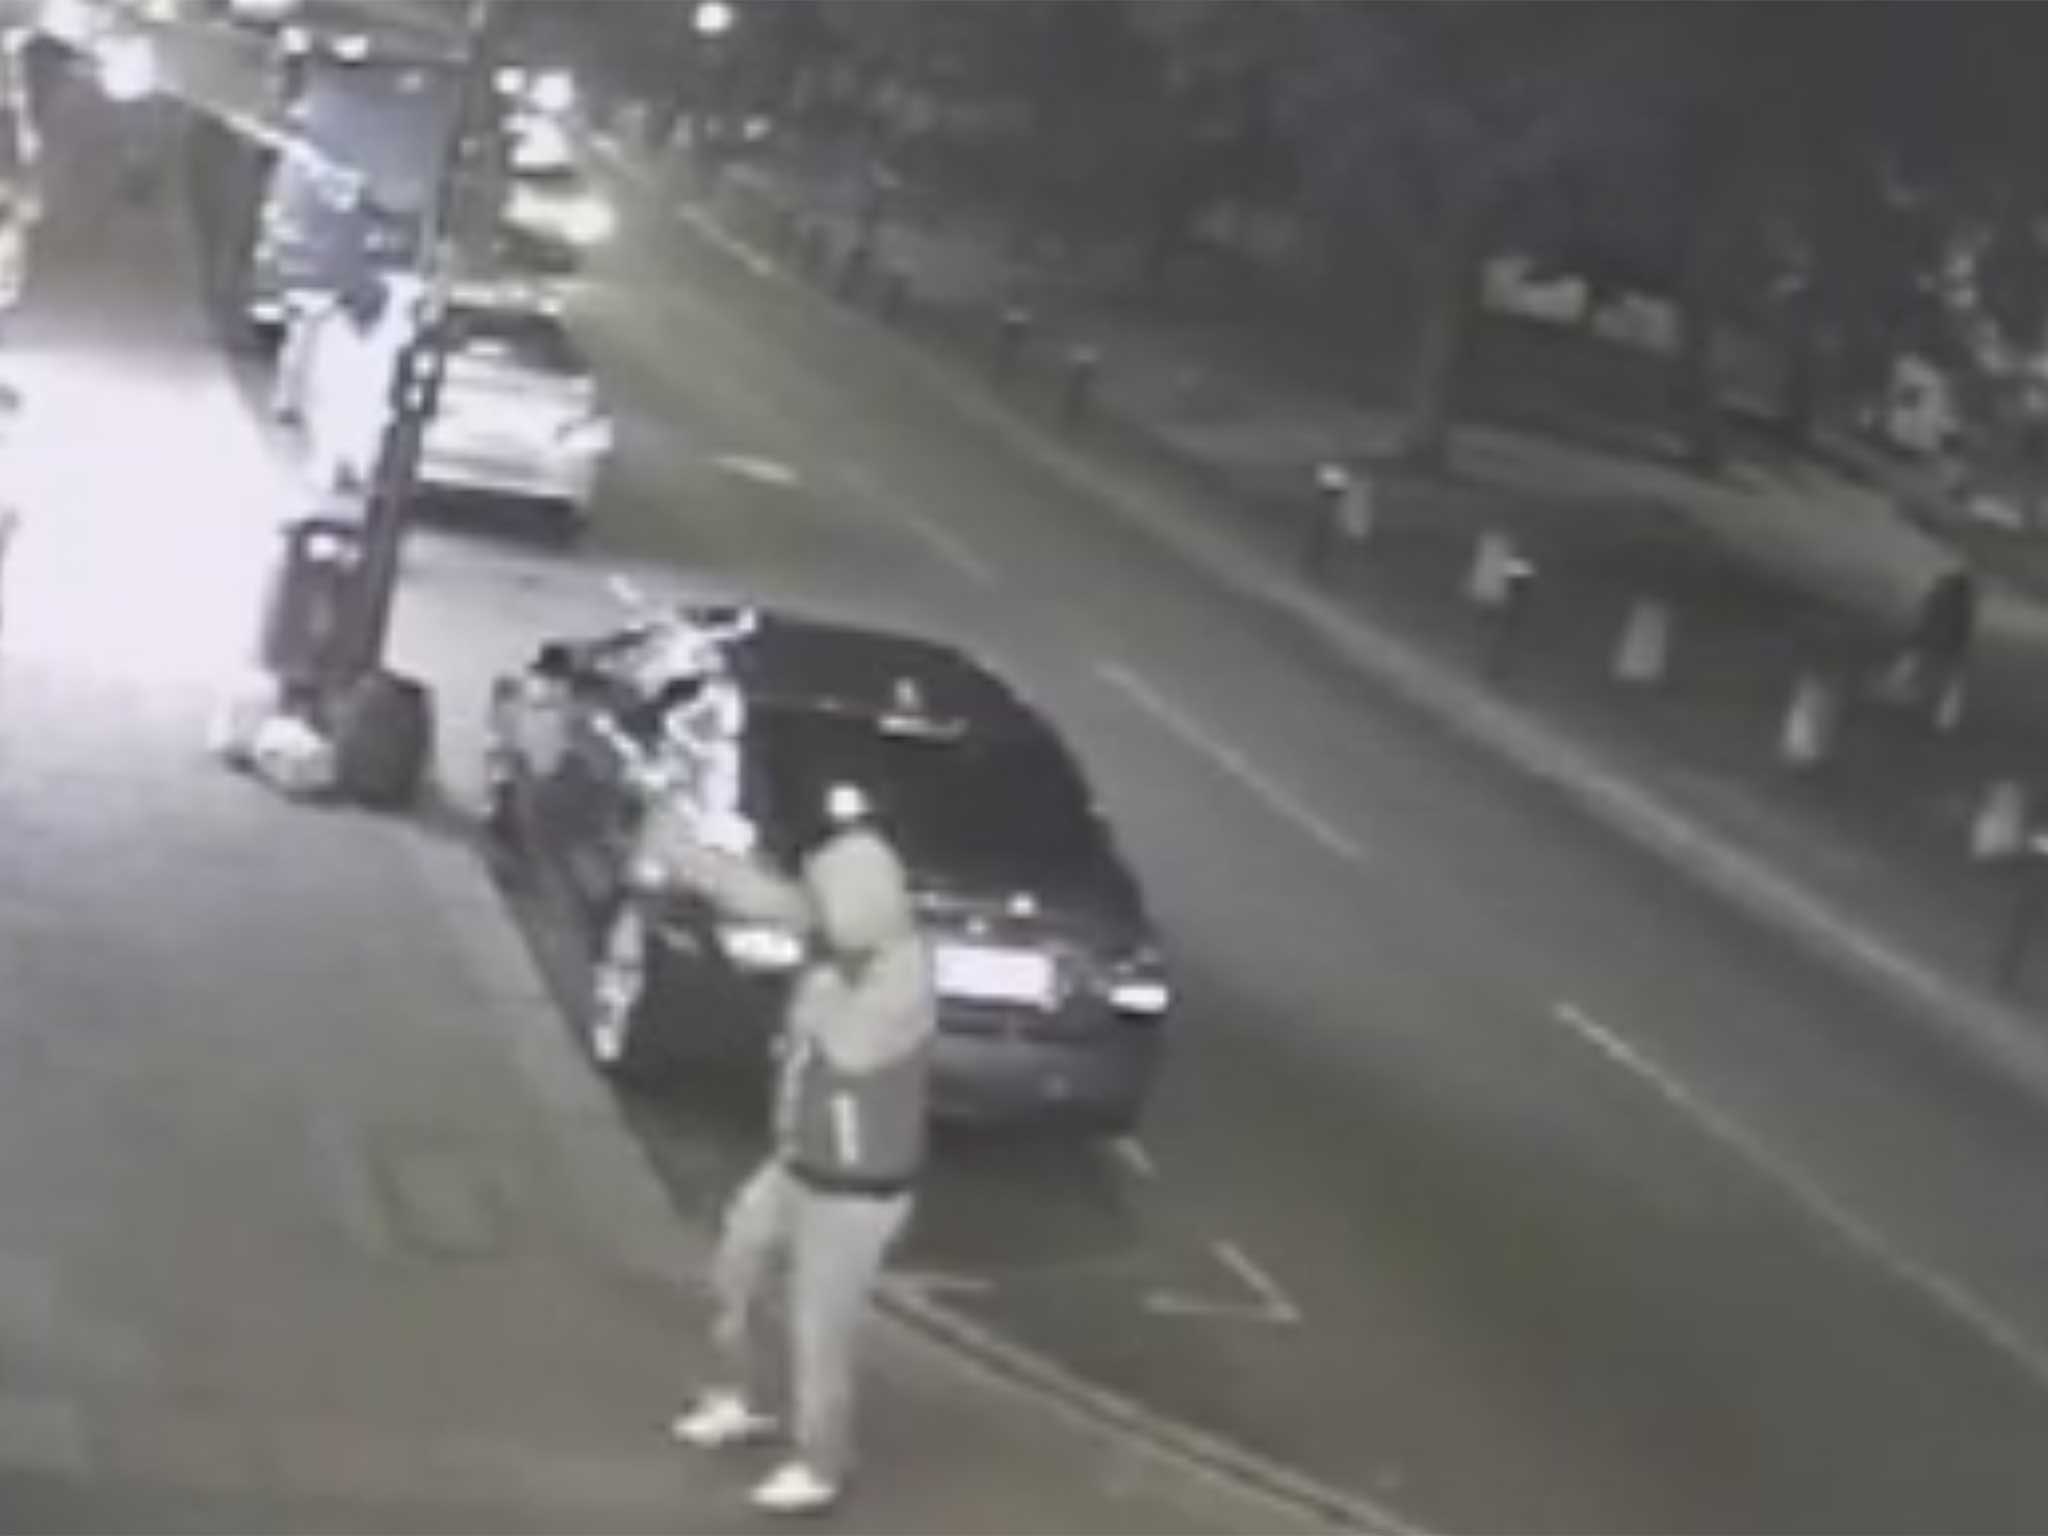 A screengrab from the CCTV that captured the incident